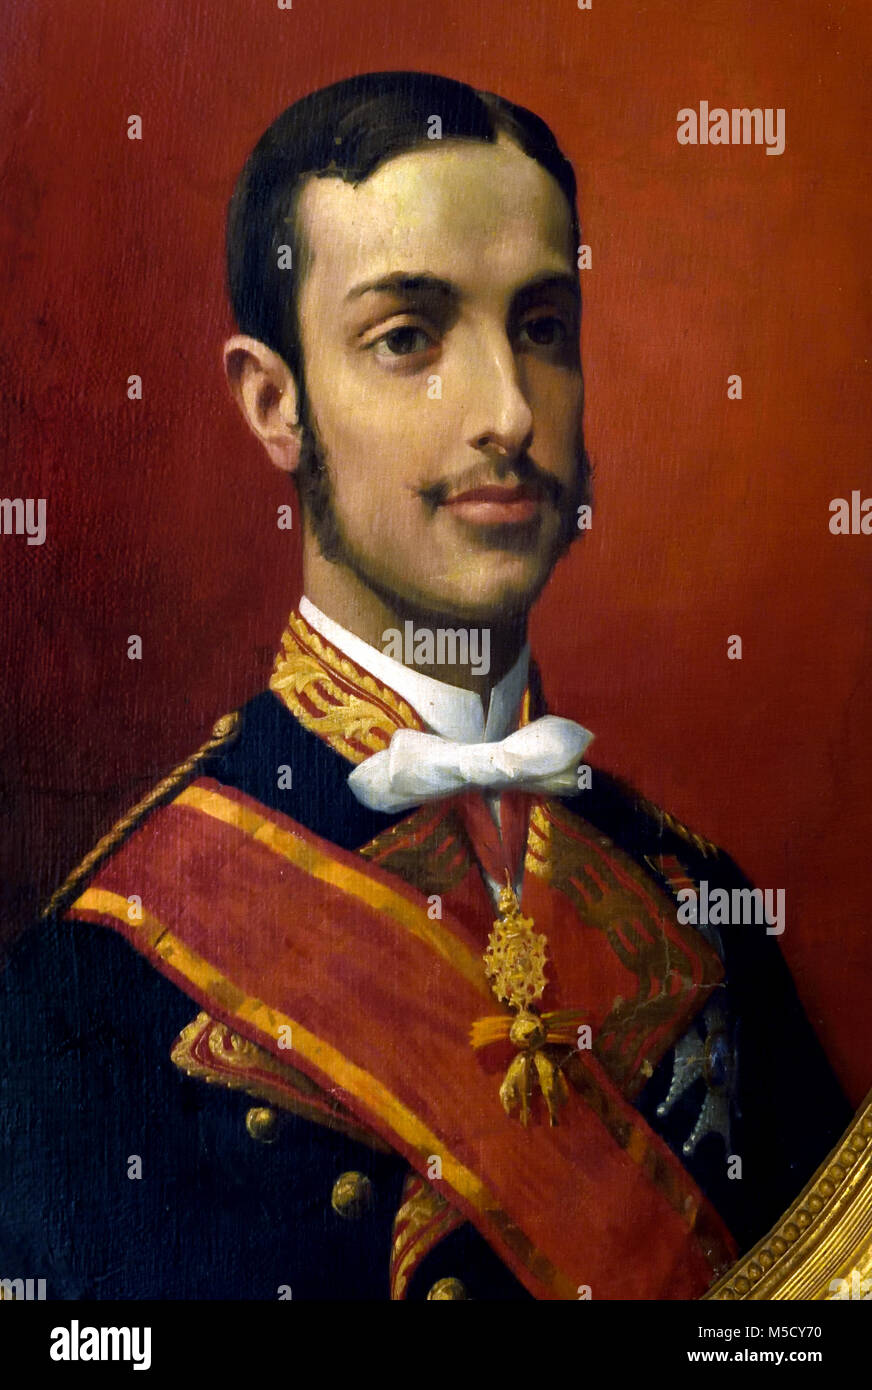 King Alfonso XII of Spain by Pedro Rodrigues de la Torre 1847-1915 19/20th, century, Spain, Spanish, ( portrait of King Alfonso XII of Spain (1857-1885), dressed in a gala captain's uniform ) Stock Photo